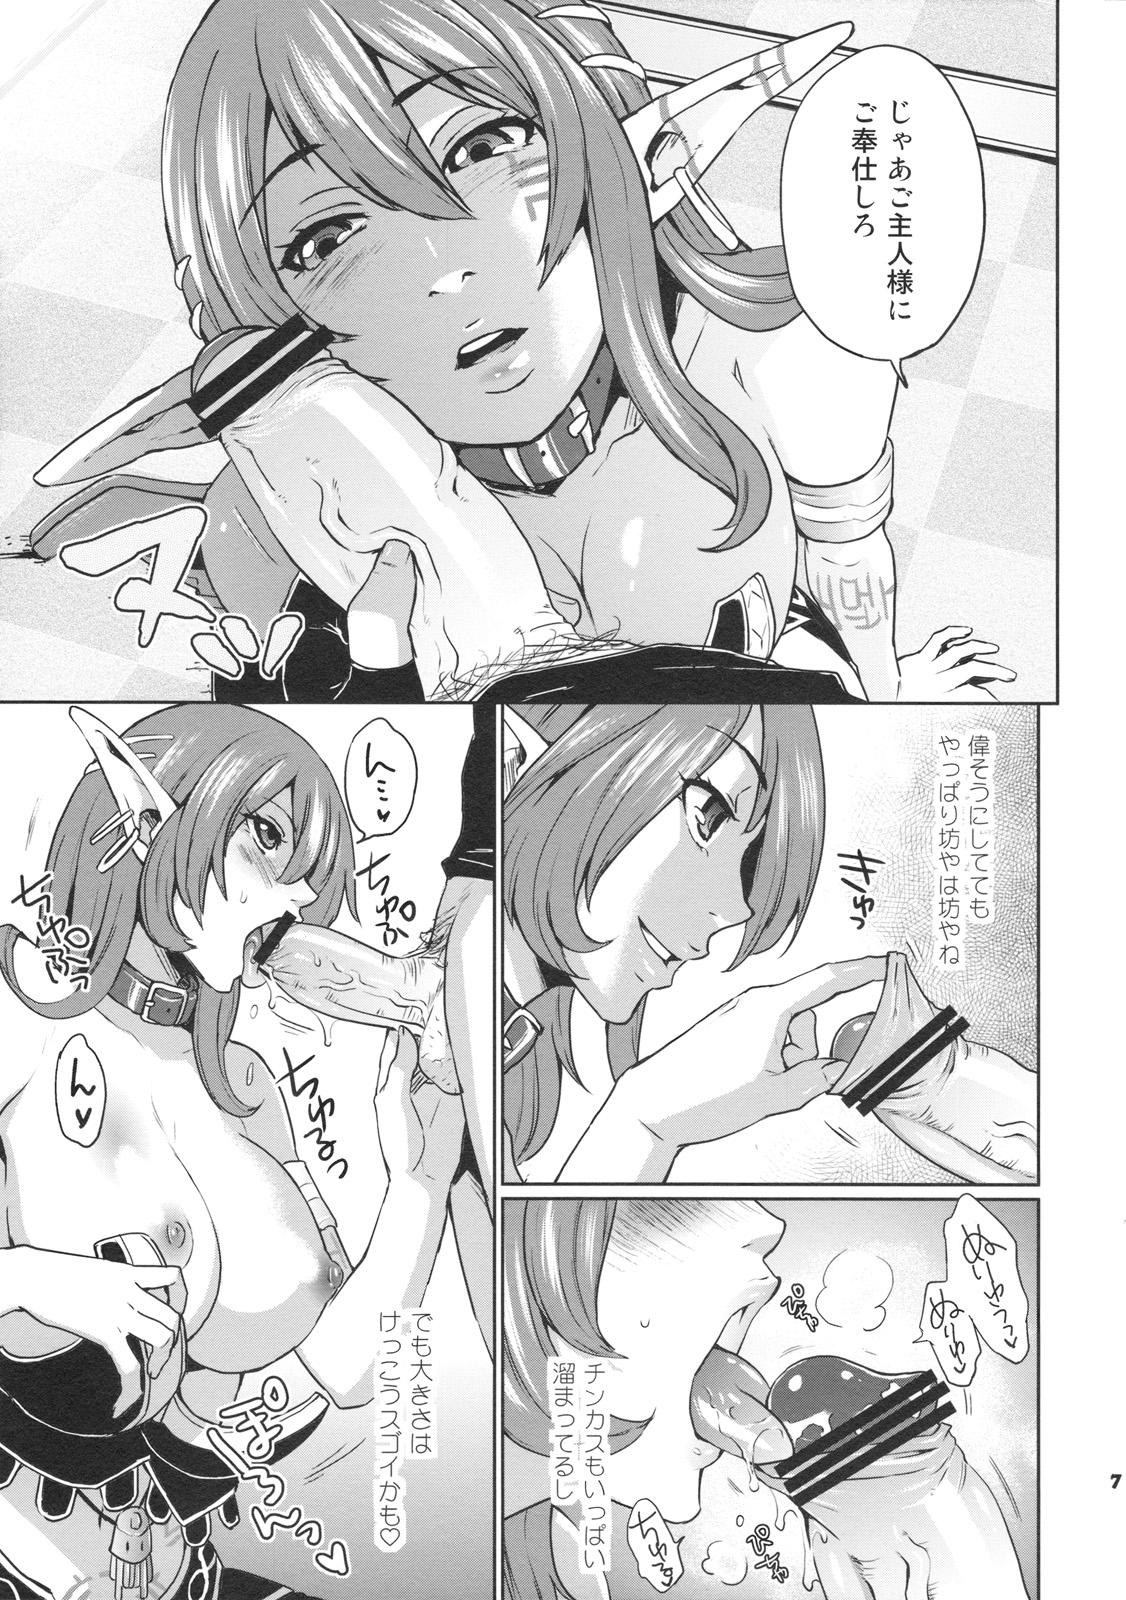 Cute Hoshi no Umi no Miboujin - The Widow of The Star Ocean - Star ocean 4 Doggie Style Porn - Page 7